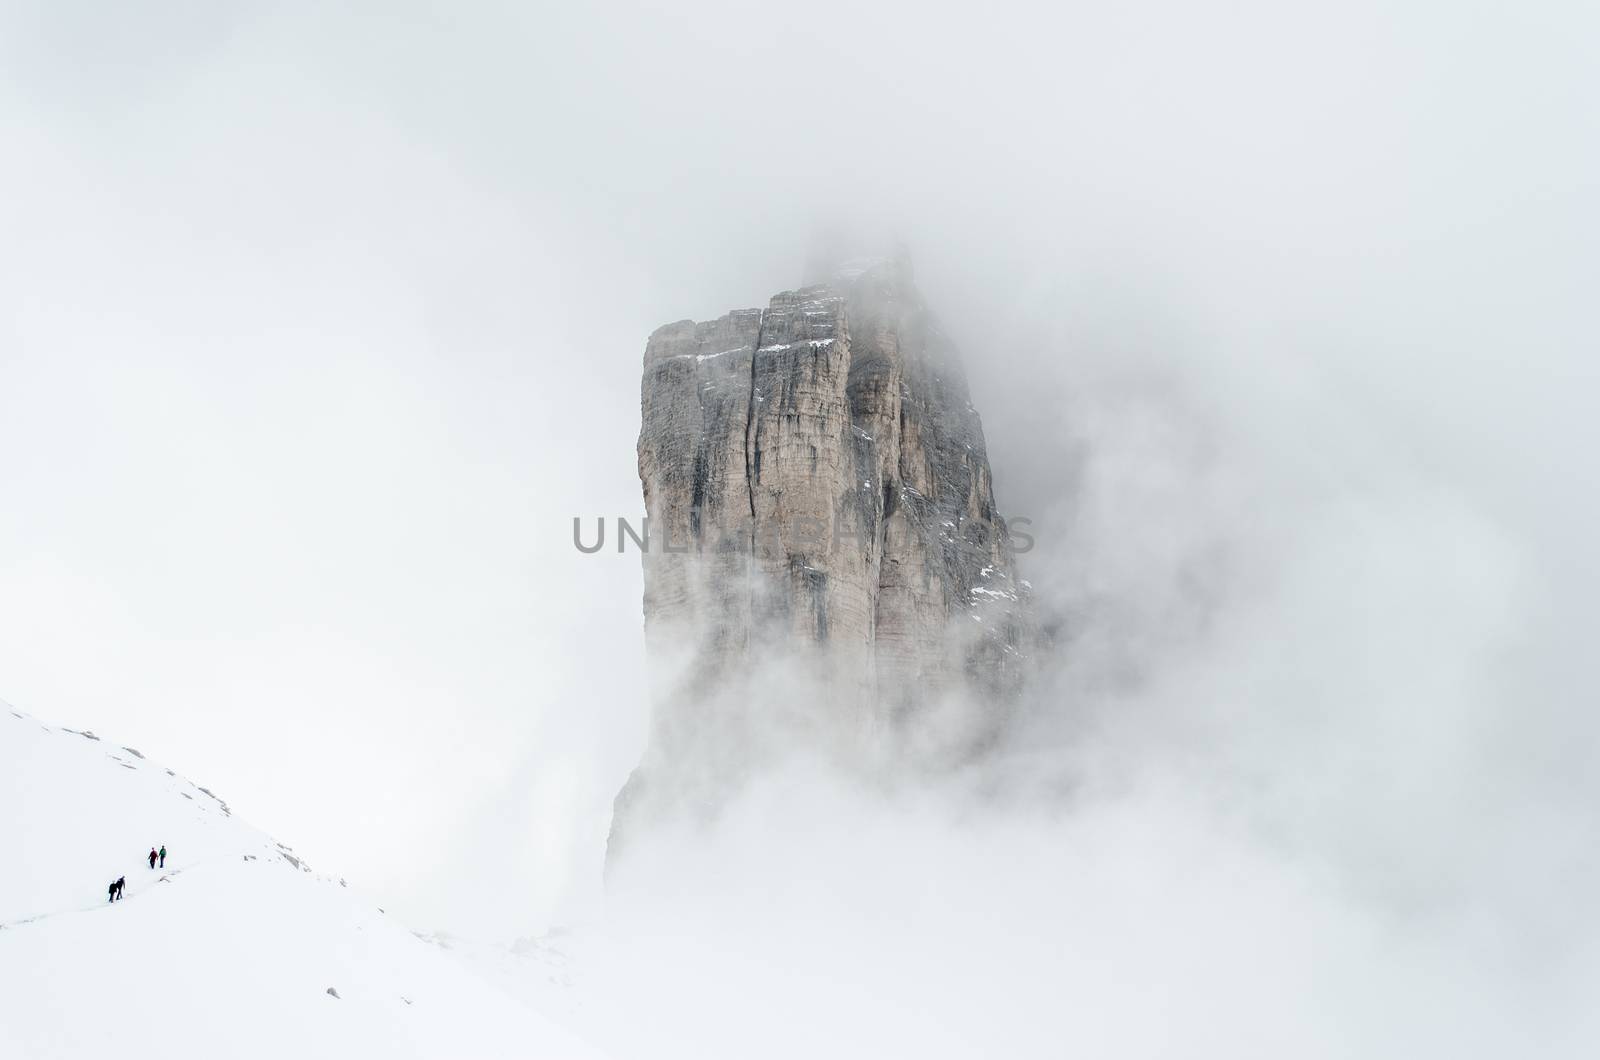 4 people in the lower left corner hiking through the snow in winter around the Tre Cime di Lavaredo, Drei Zinnen, Dolomites mountain peaks partially covered in the clouds.